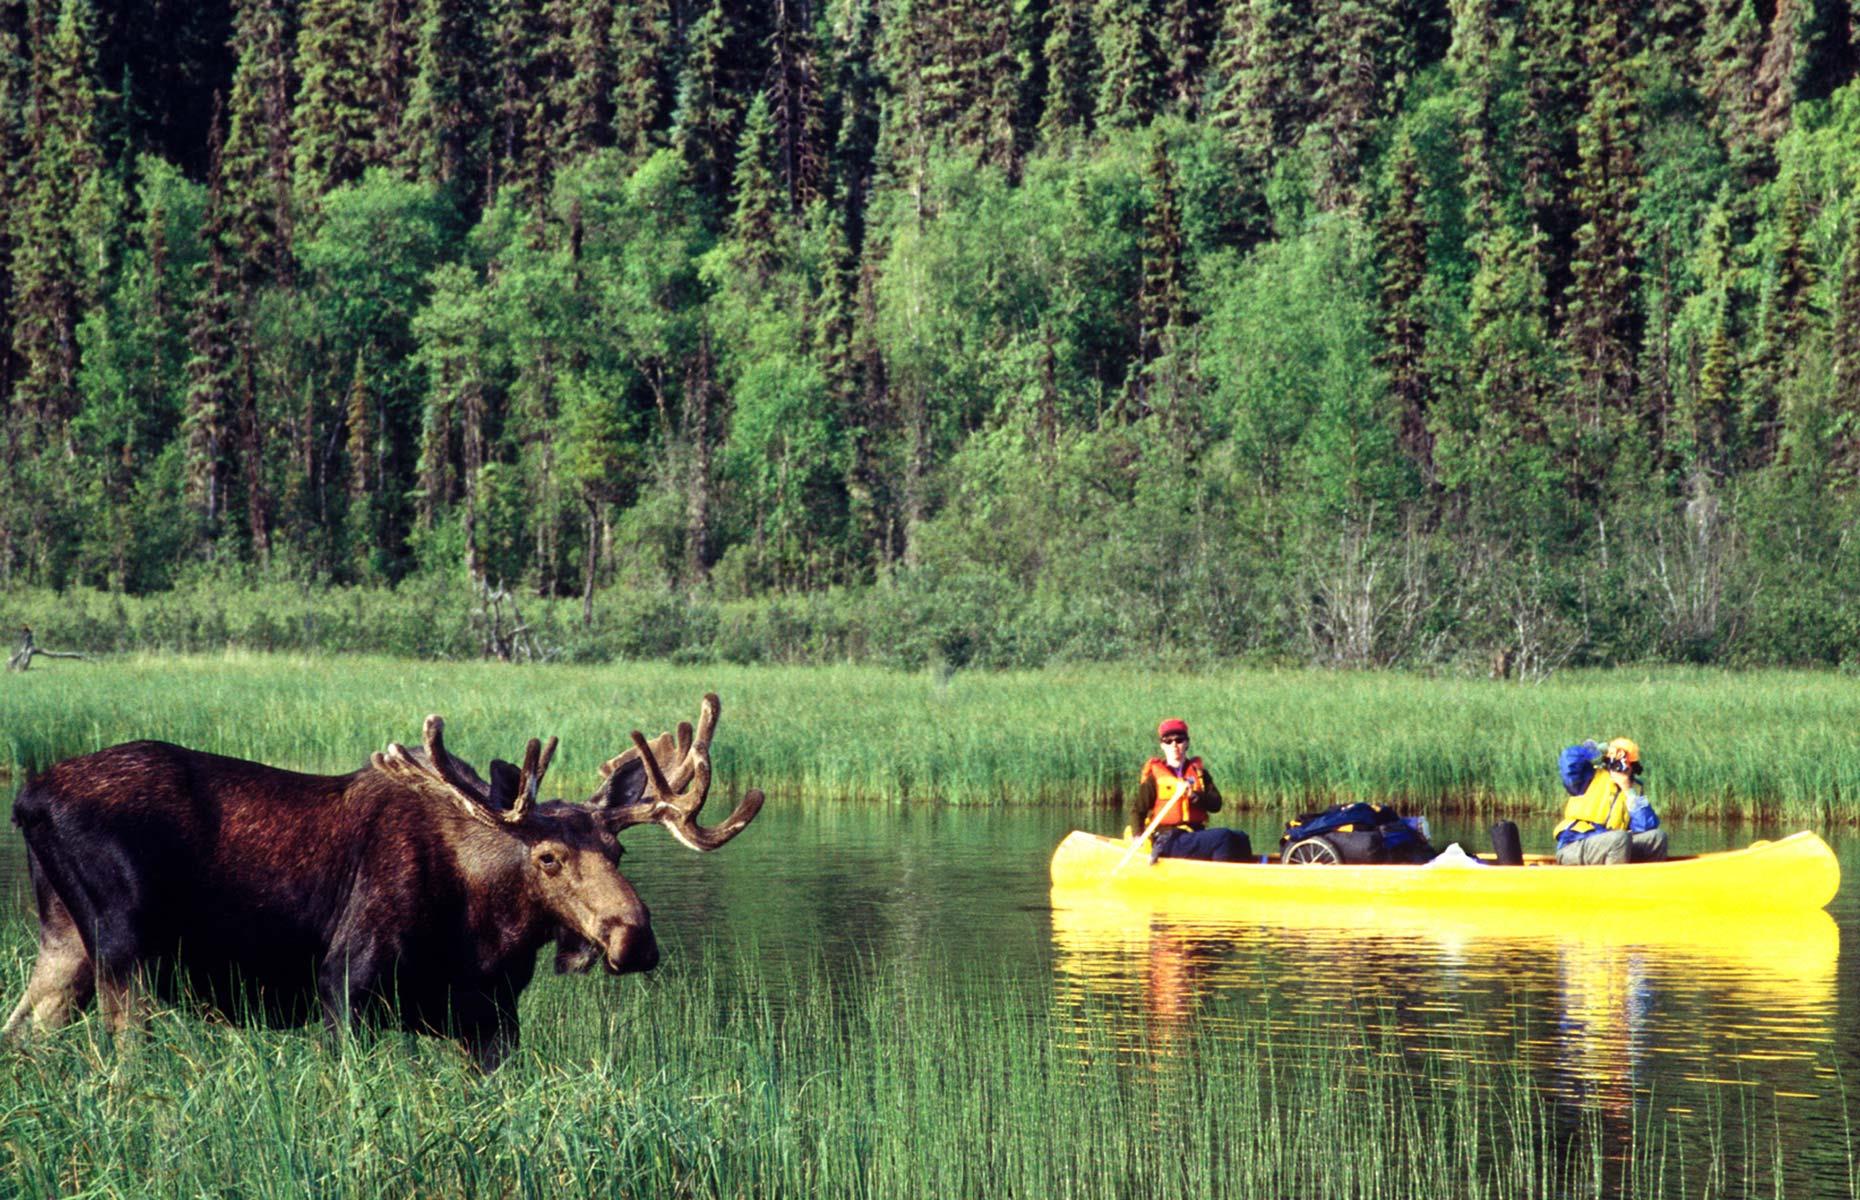 <p>Paddle off in search of moose in Algonquin Provincial park, a vast stretch of wilderness in Ontario. Most of the park is only accessible by canoe (there’s 1,200 miles of canoe routes around the lakes, streams and portage trails) so join a guided canoe trip to navigate some of little visited parts and you'll be in with a good chance of spotting the magnificent creatures. You can also spend the night camping out in the wild.</p>